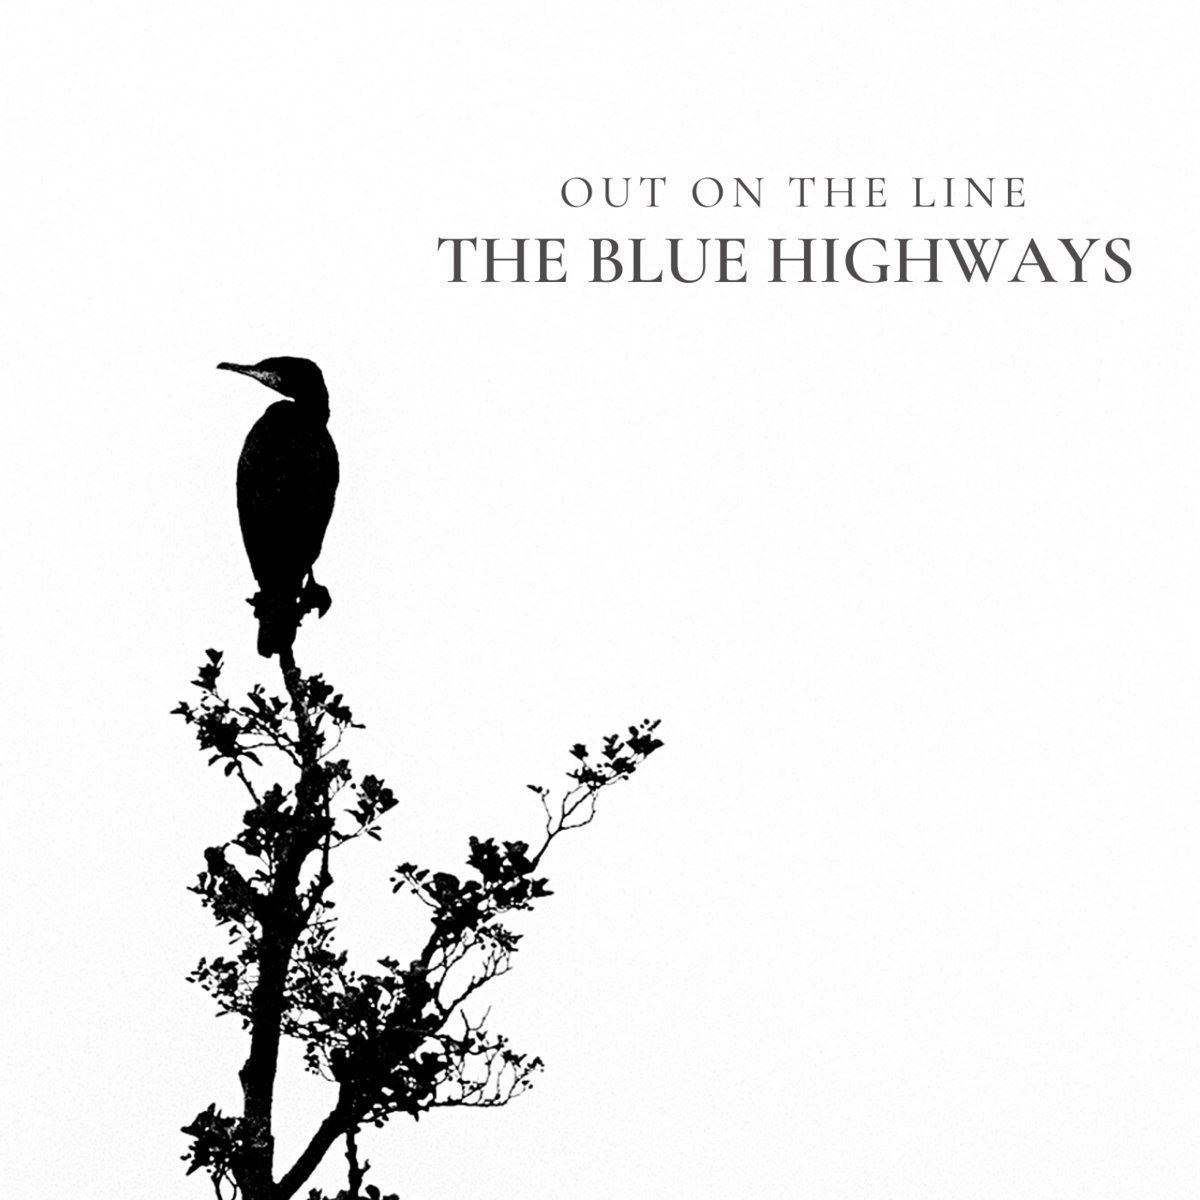 The Blue Highways - Out On The Line album review
#betterlatethannever #probably #outontheline @thebluehighways 
tmblr.co/Zc96bkeOfJCAmW…